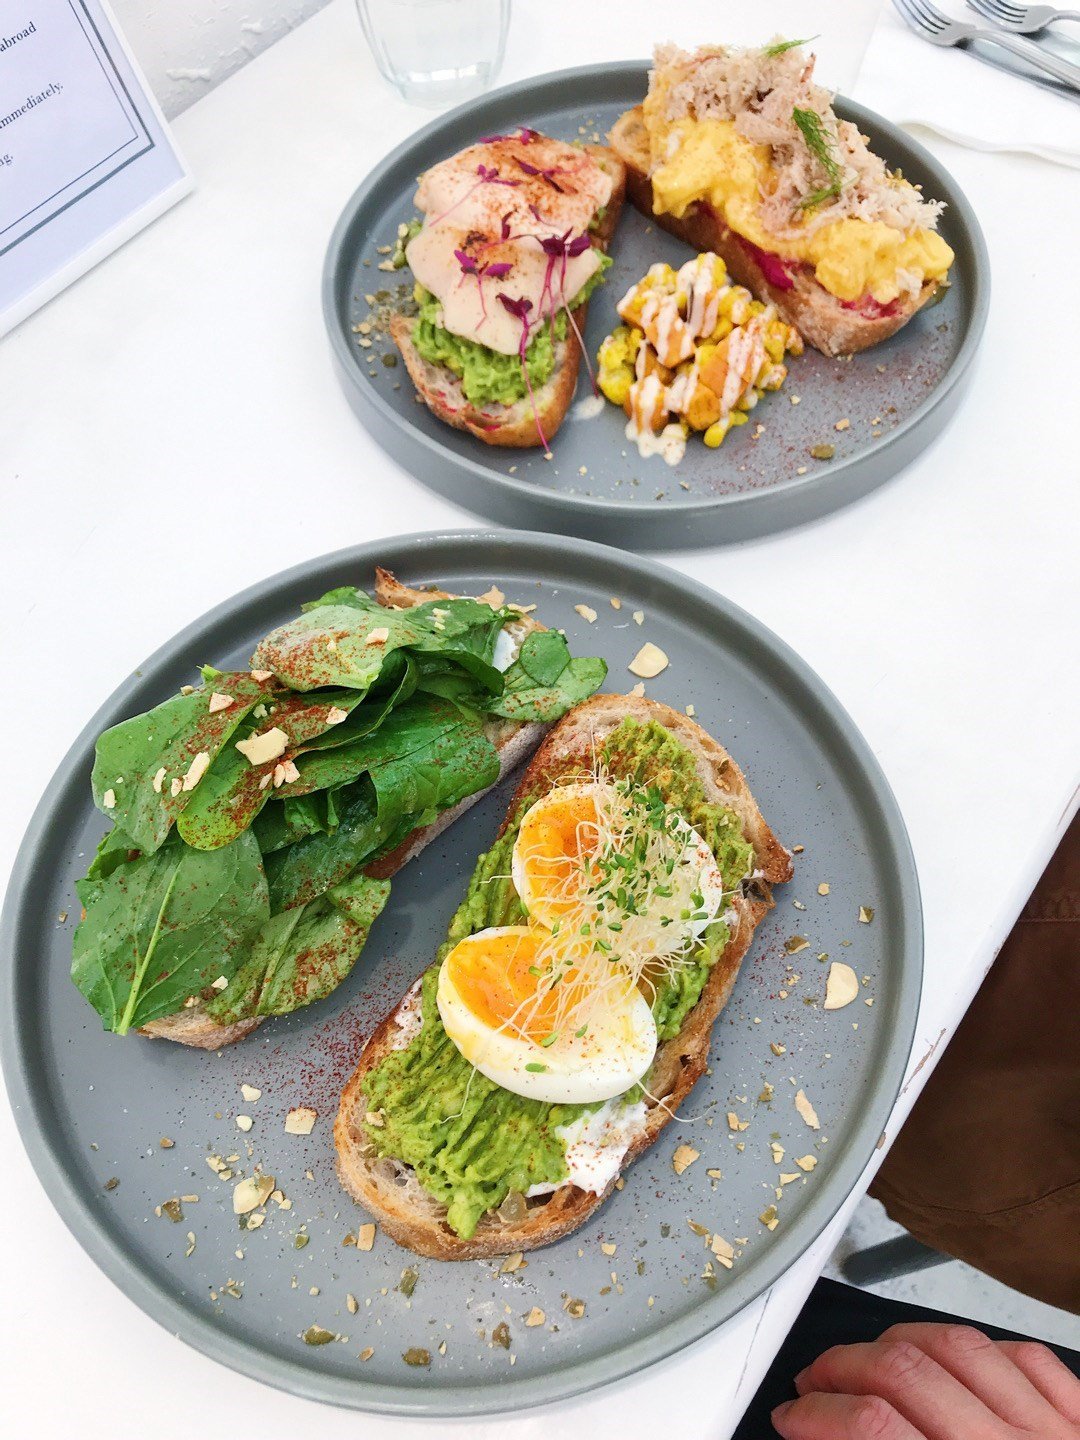 Krønike Primitiv Madison the toast tailoring - 3 toppings (soft-boiled eggs, baby spinach & avocado)  on sourdough bread with lemon cream cheese spread - APT. (月街)'s photo in  Wan Chai Hong Kong | OpenRice Hong